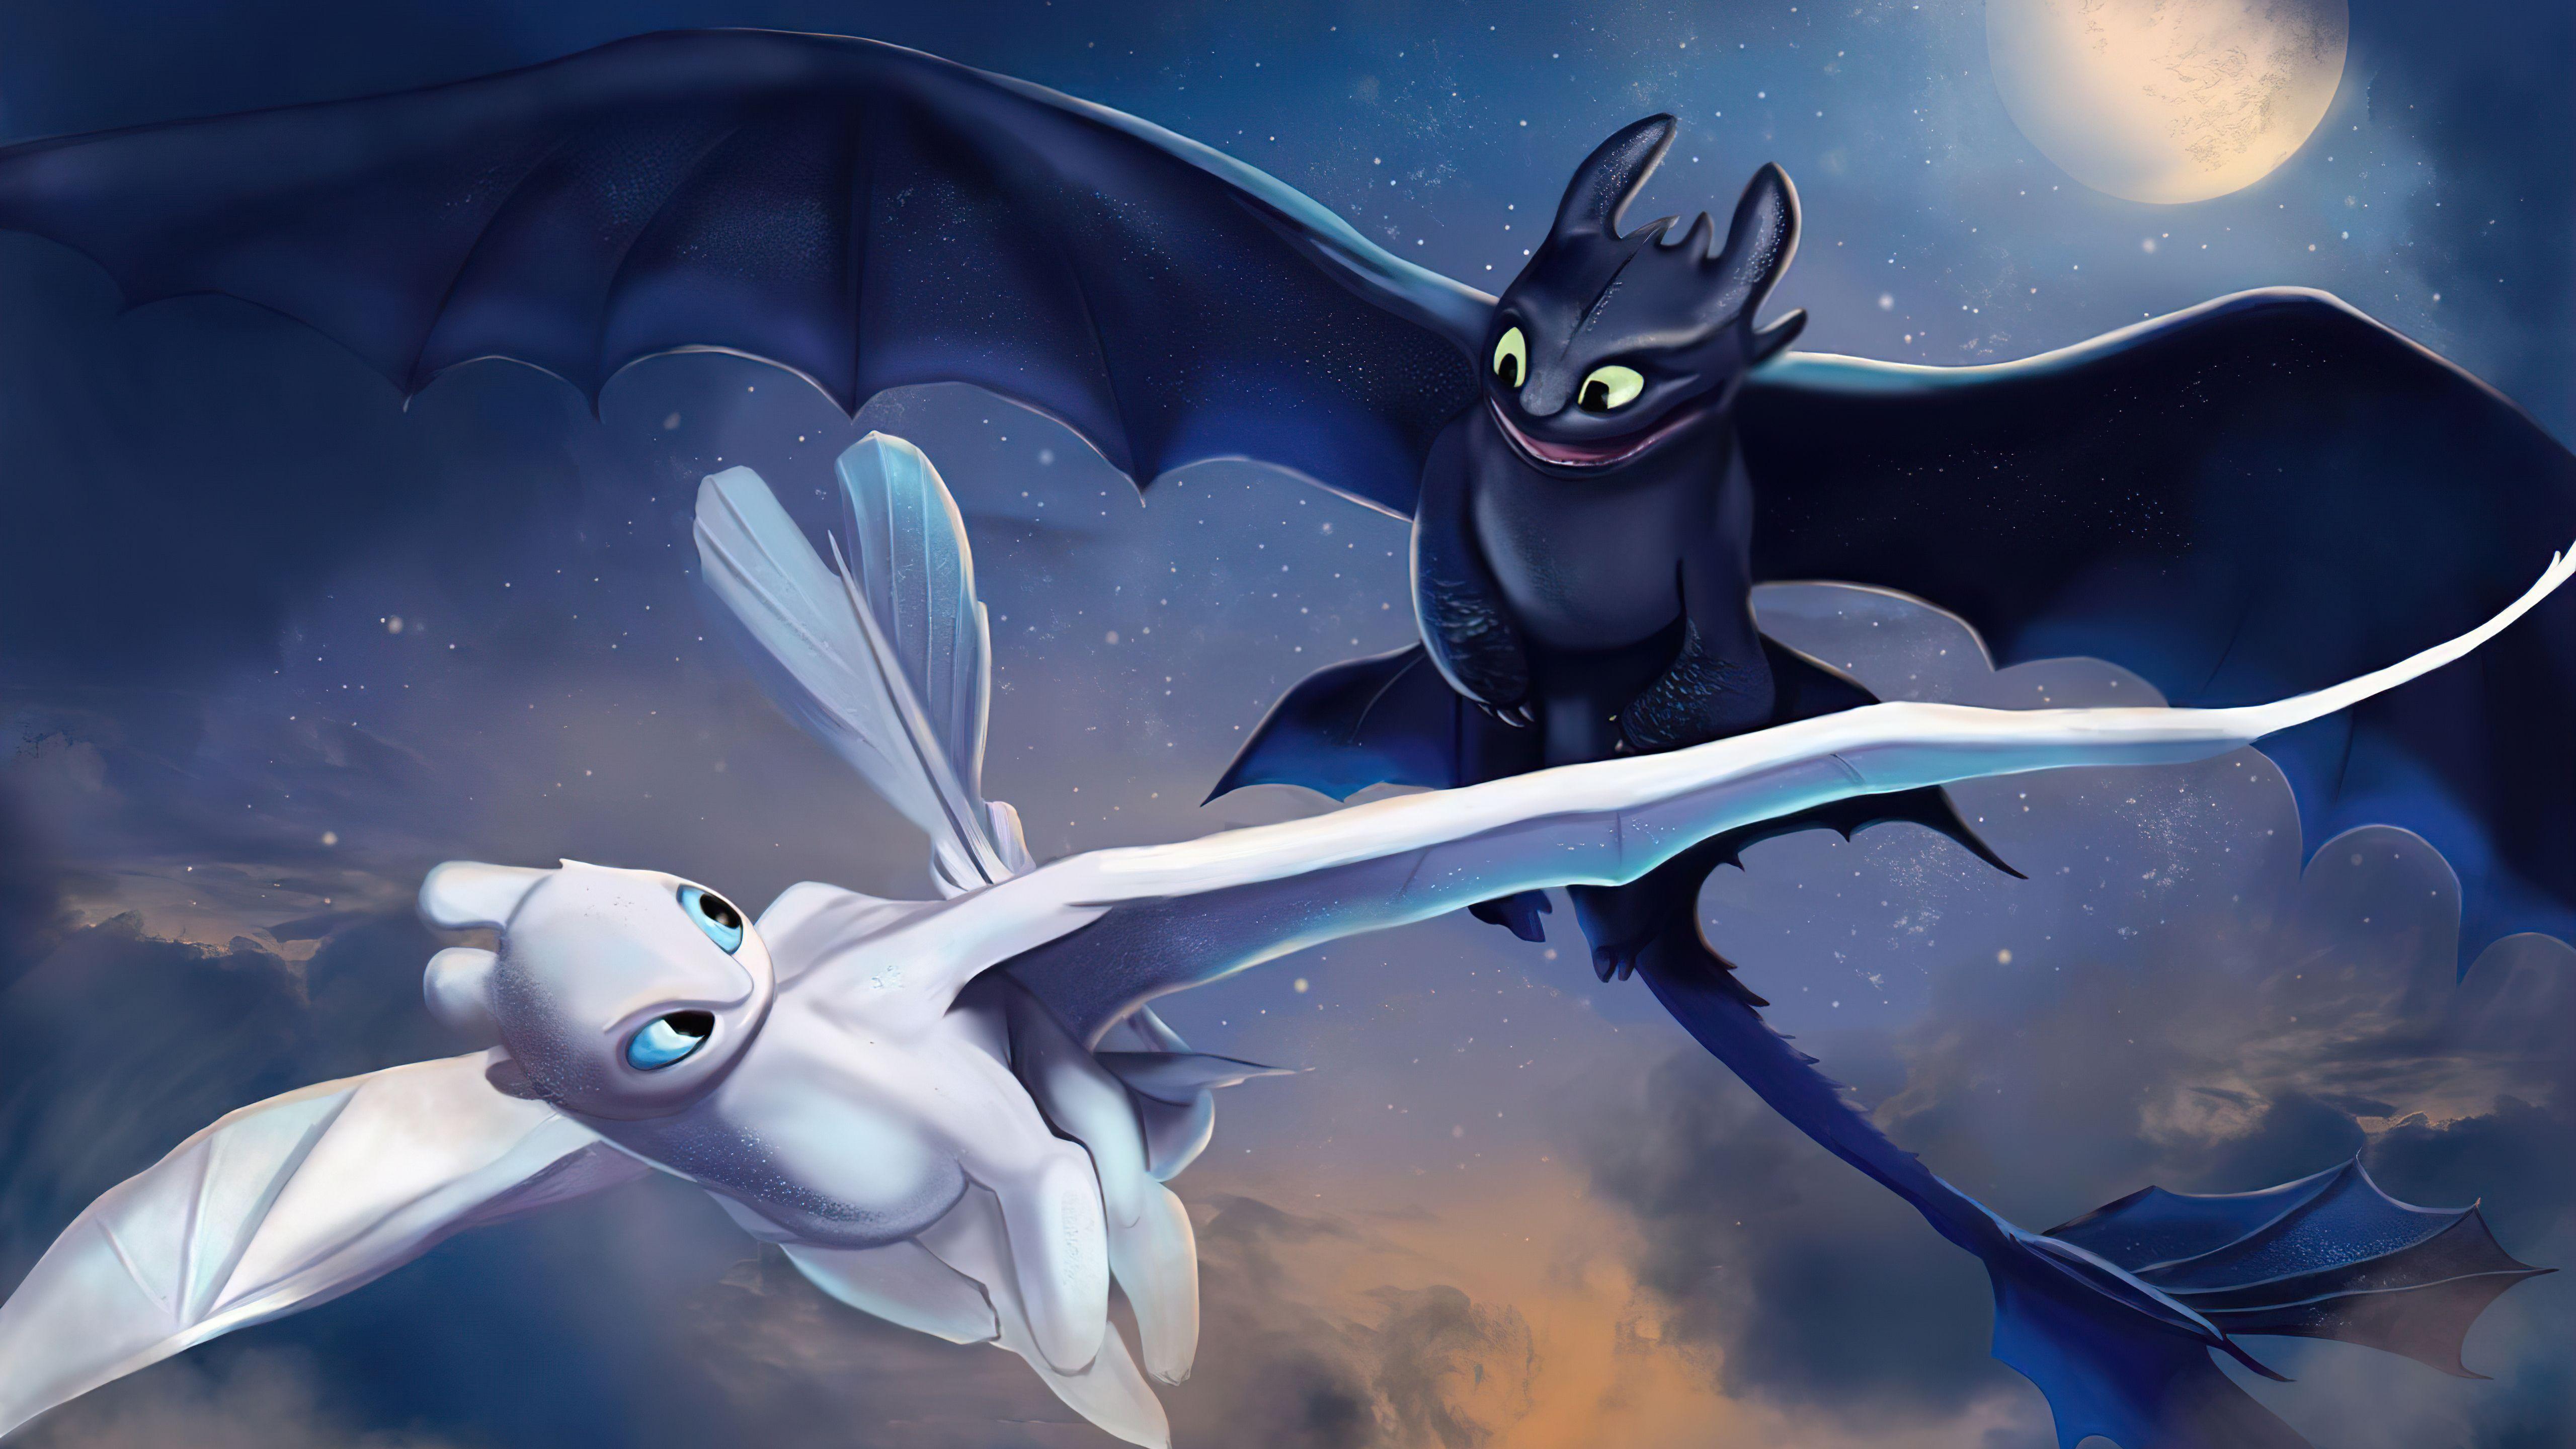 Toothless And Light Fury Wallpapers Top Free Toothless And Light Fury Backgrounds Wallpaperaccess